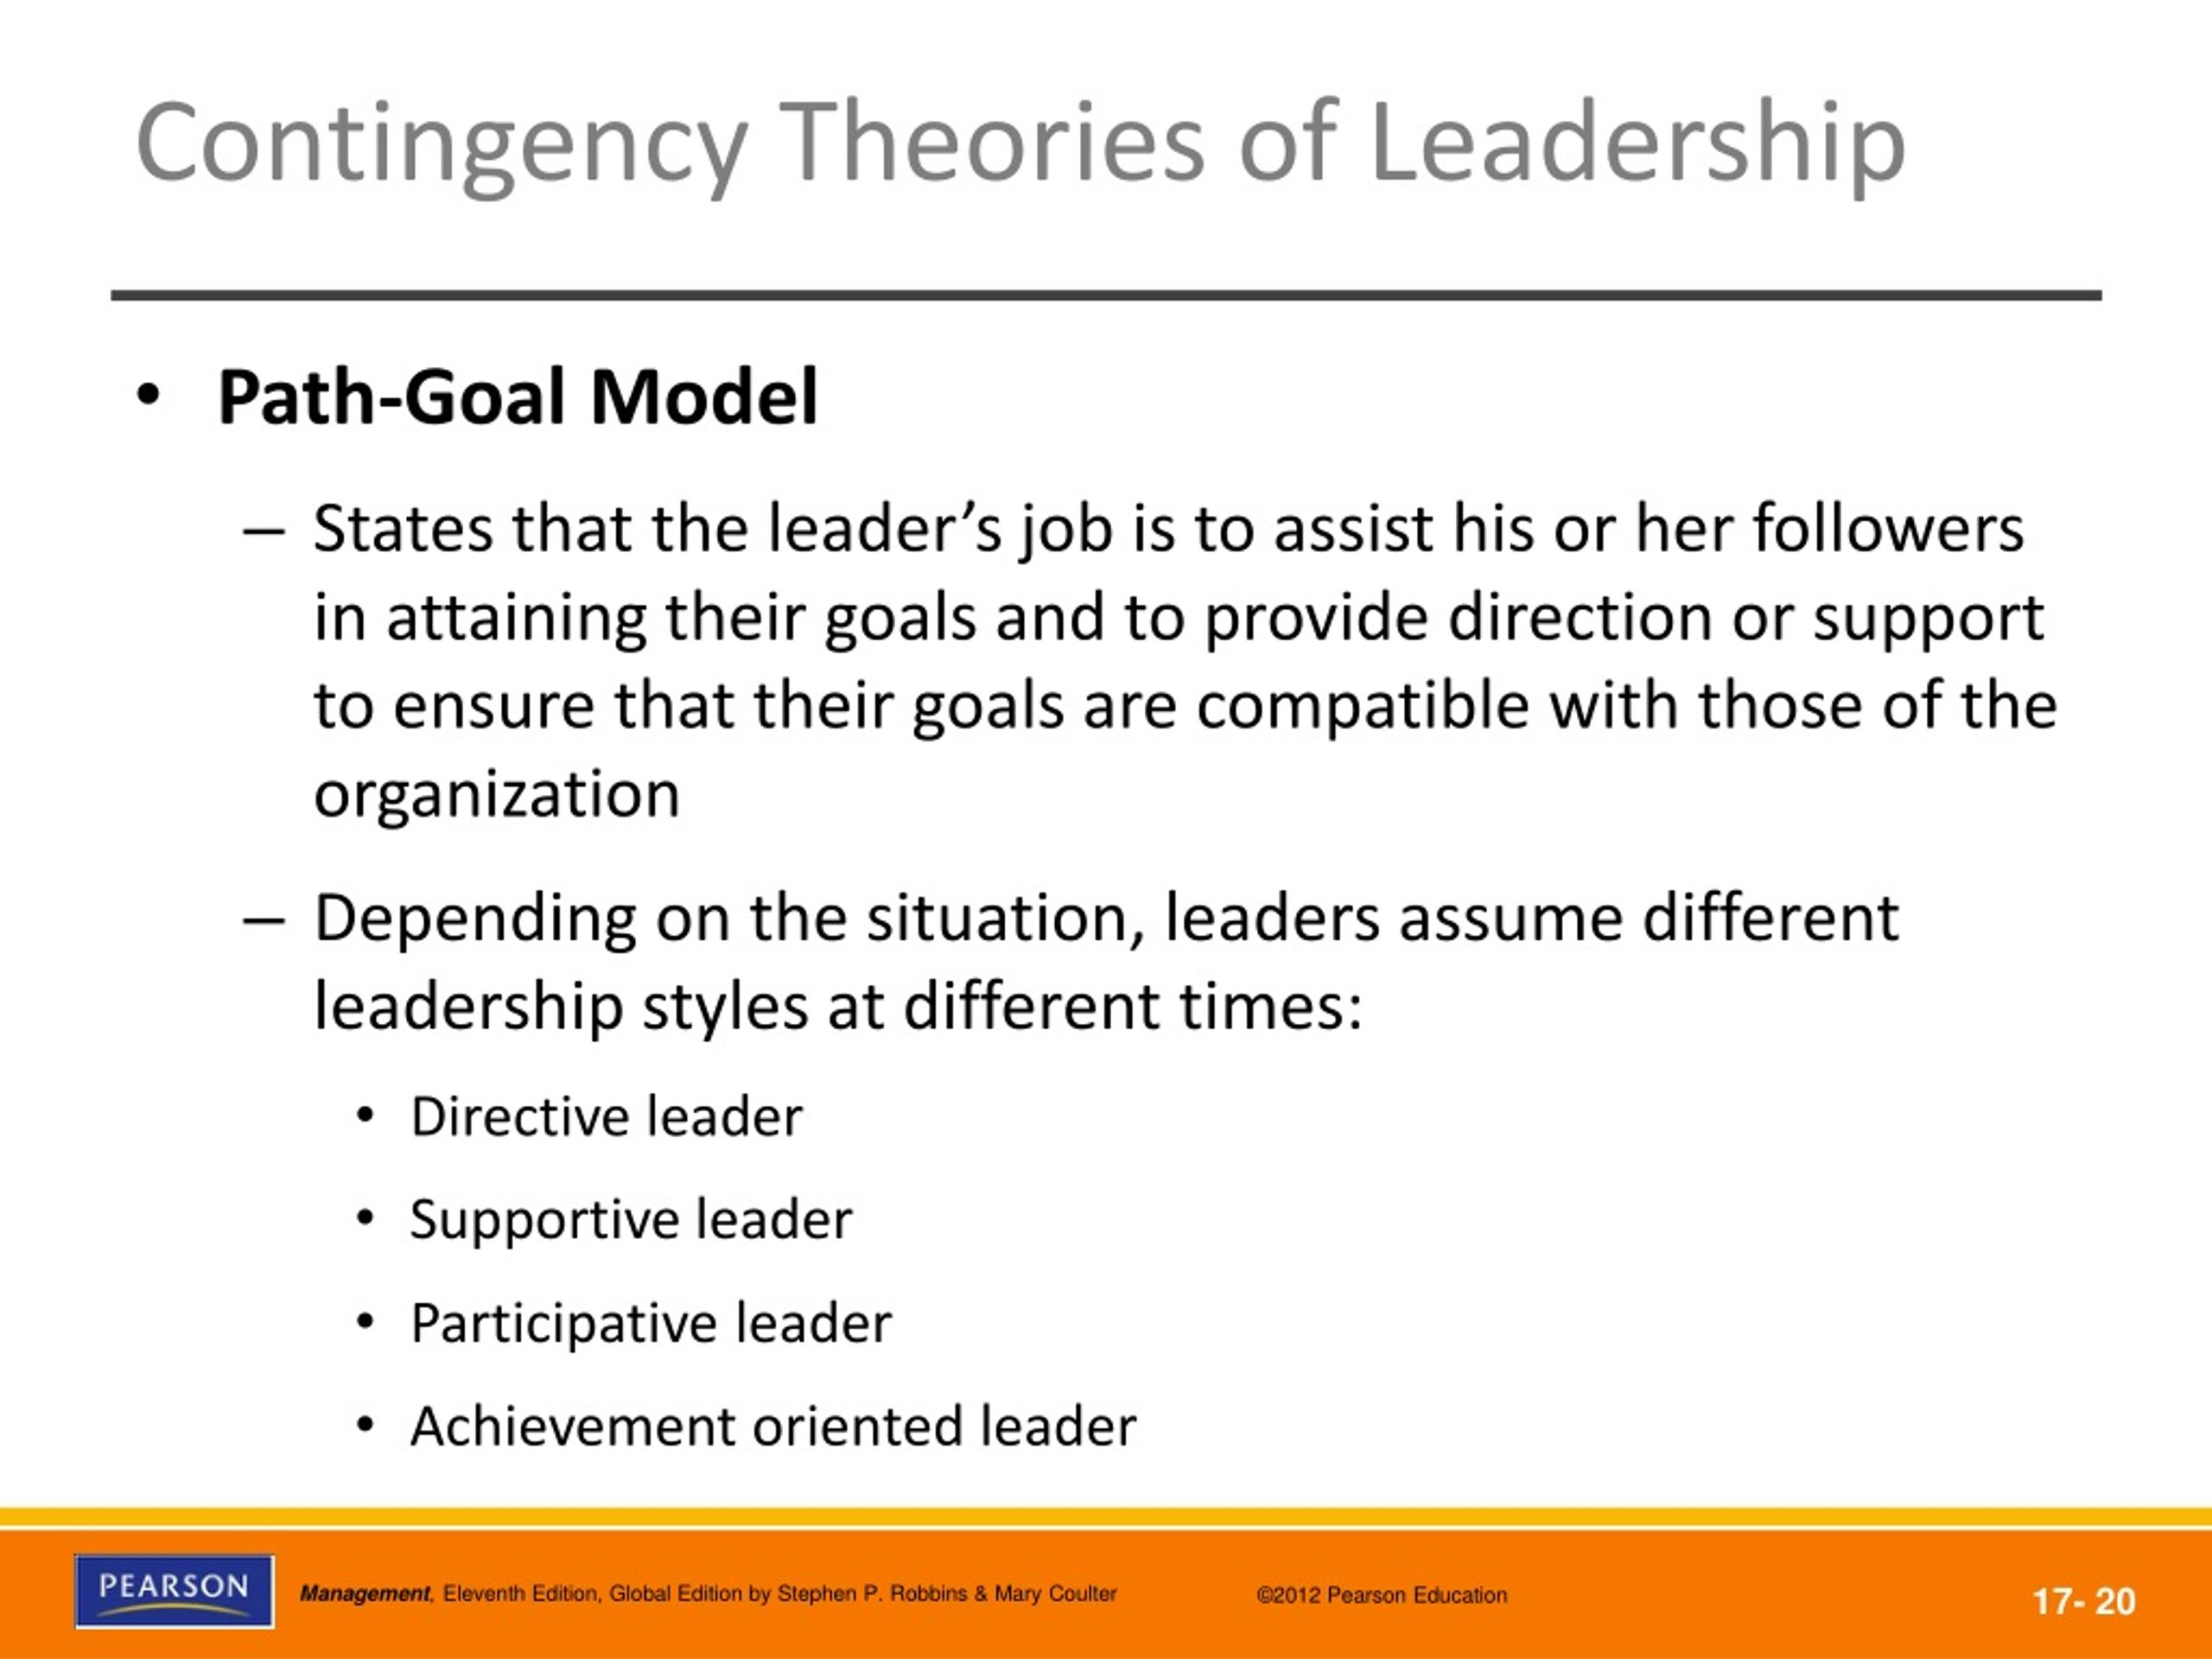 Compare And Contrast Theories Of Leadership